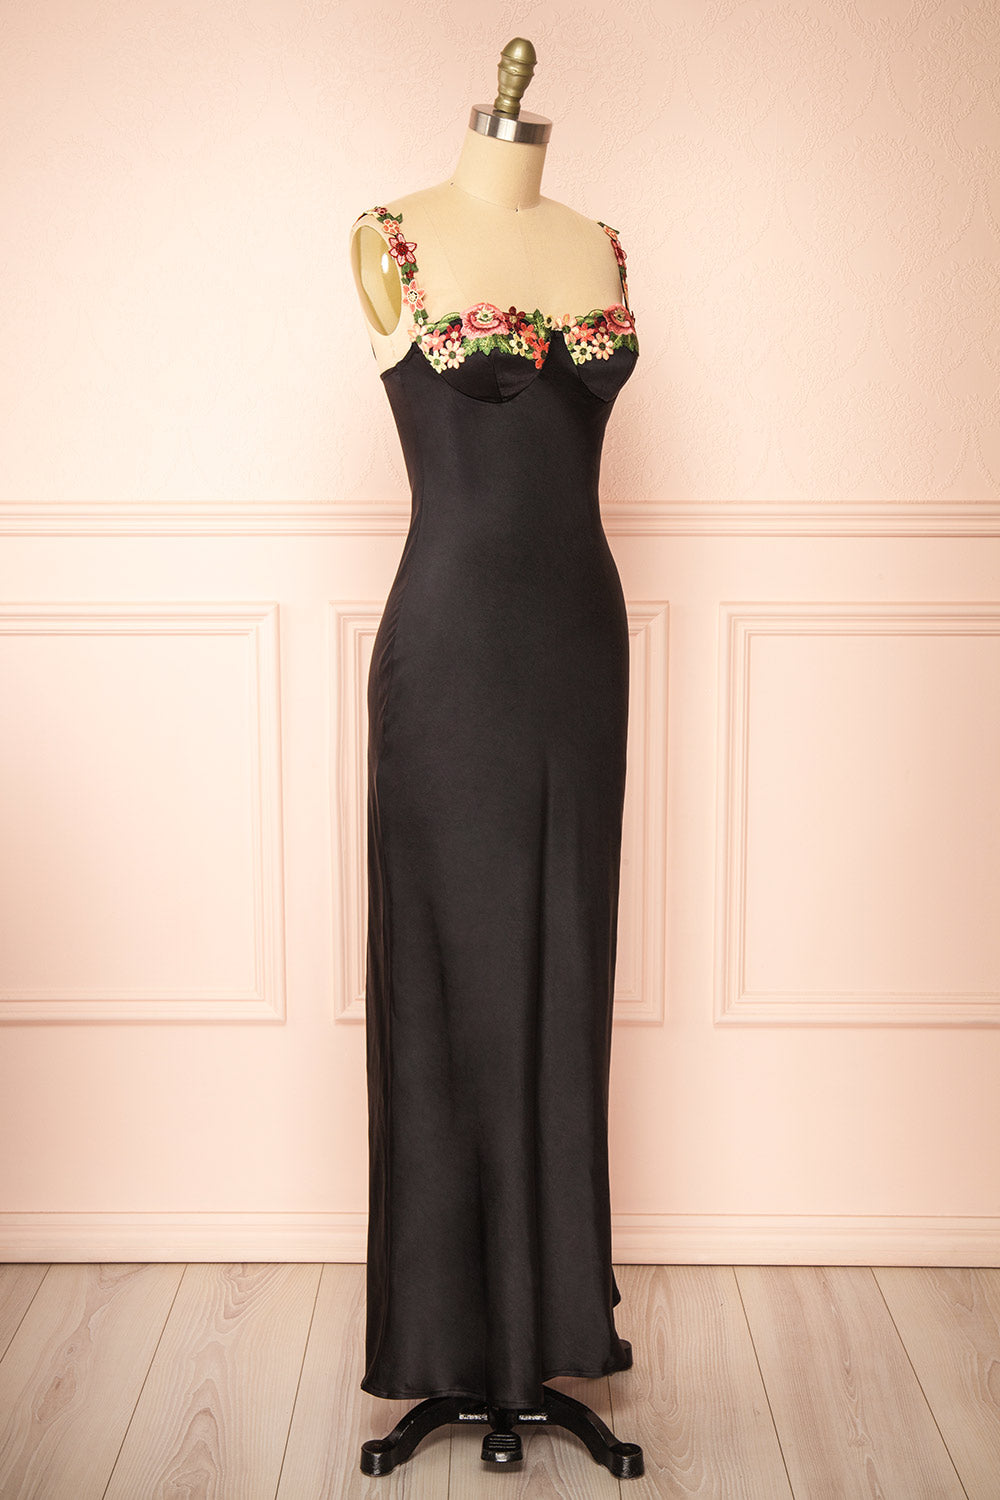 Ramona Black Slip Dress w/ Floral Embroidery | Boutique 1861 side view